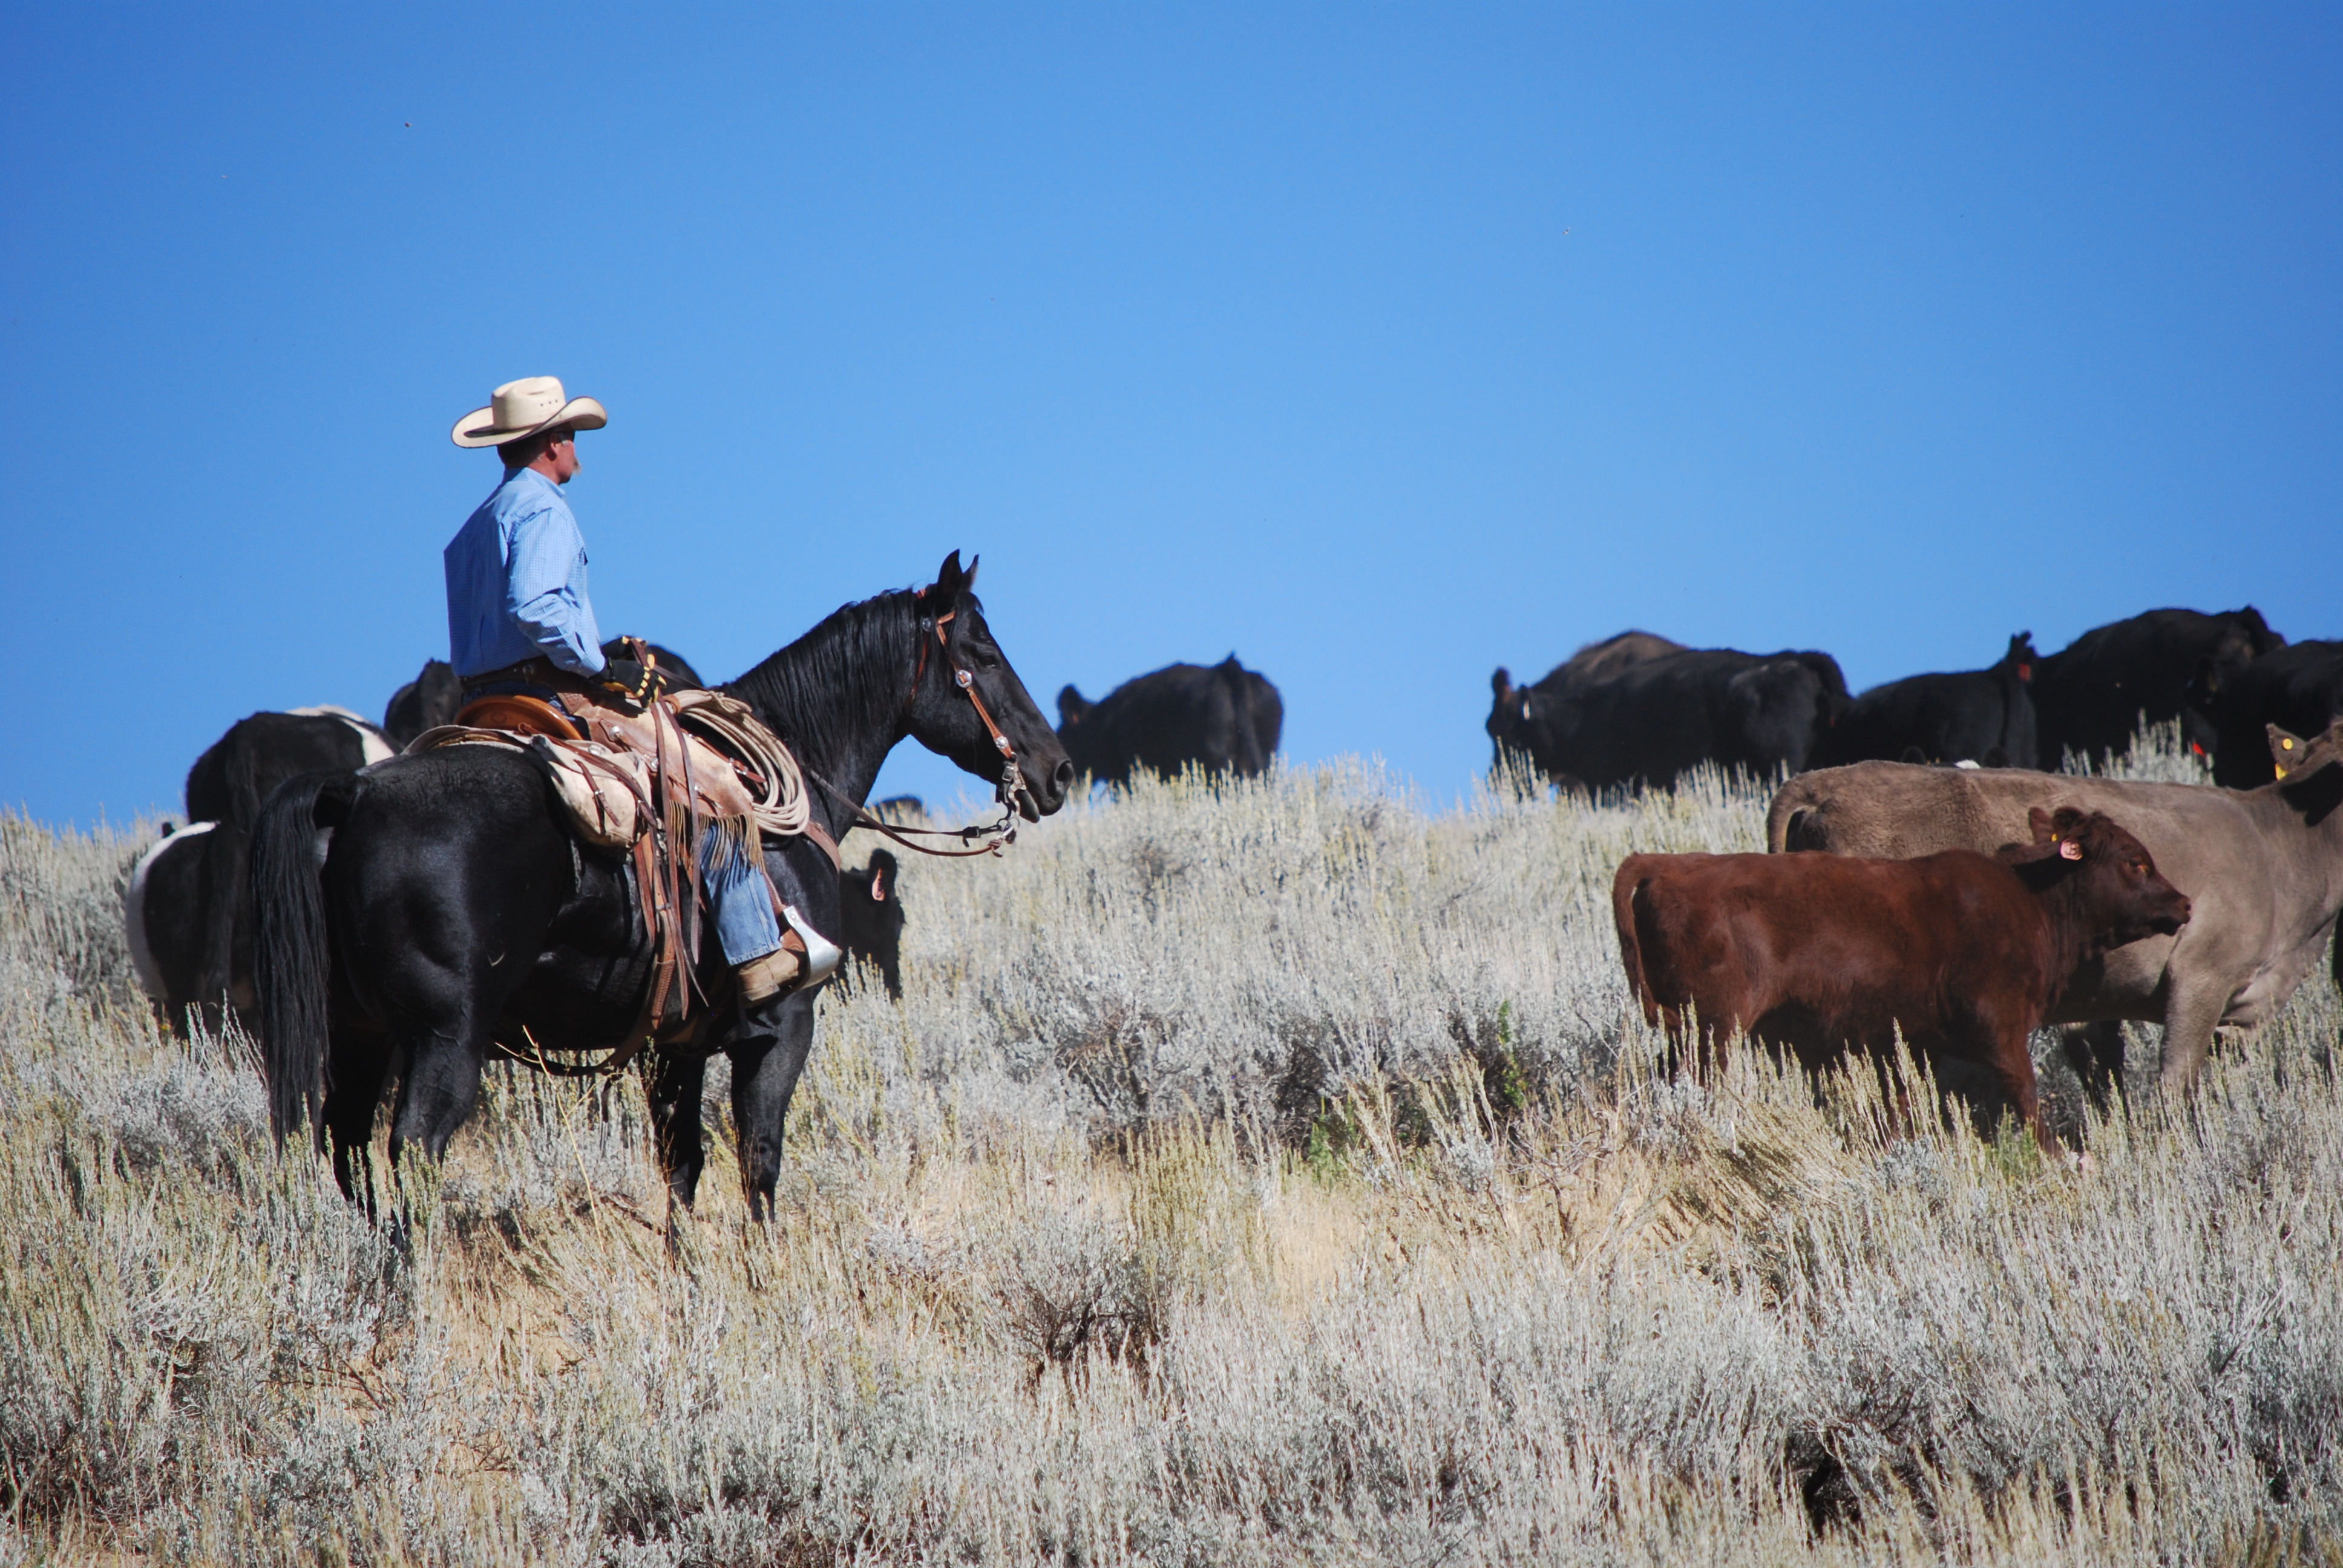 Cattle on mountain with rancher on horseback.